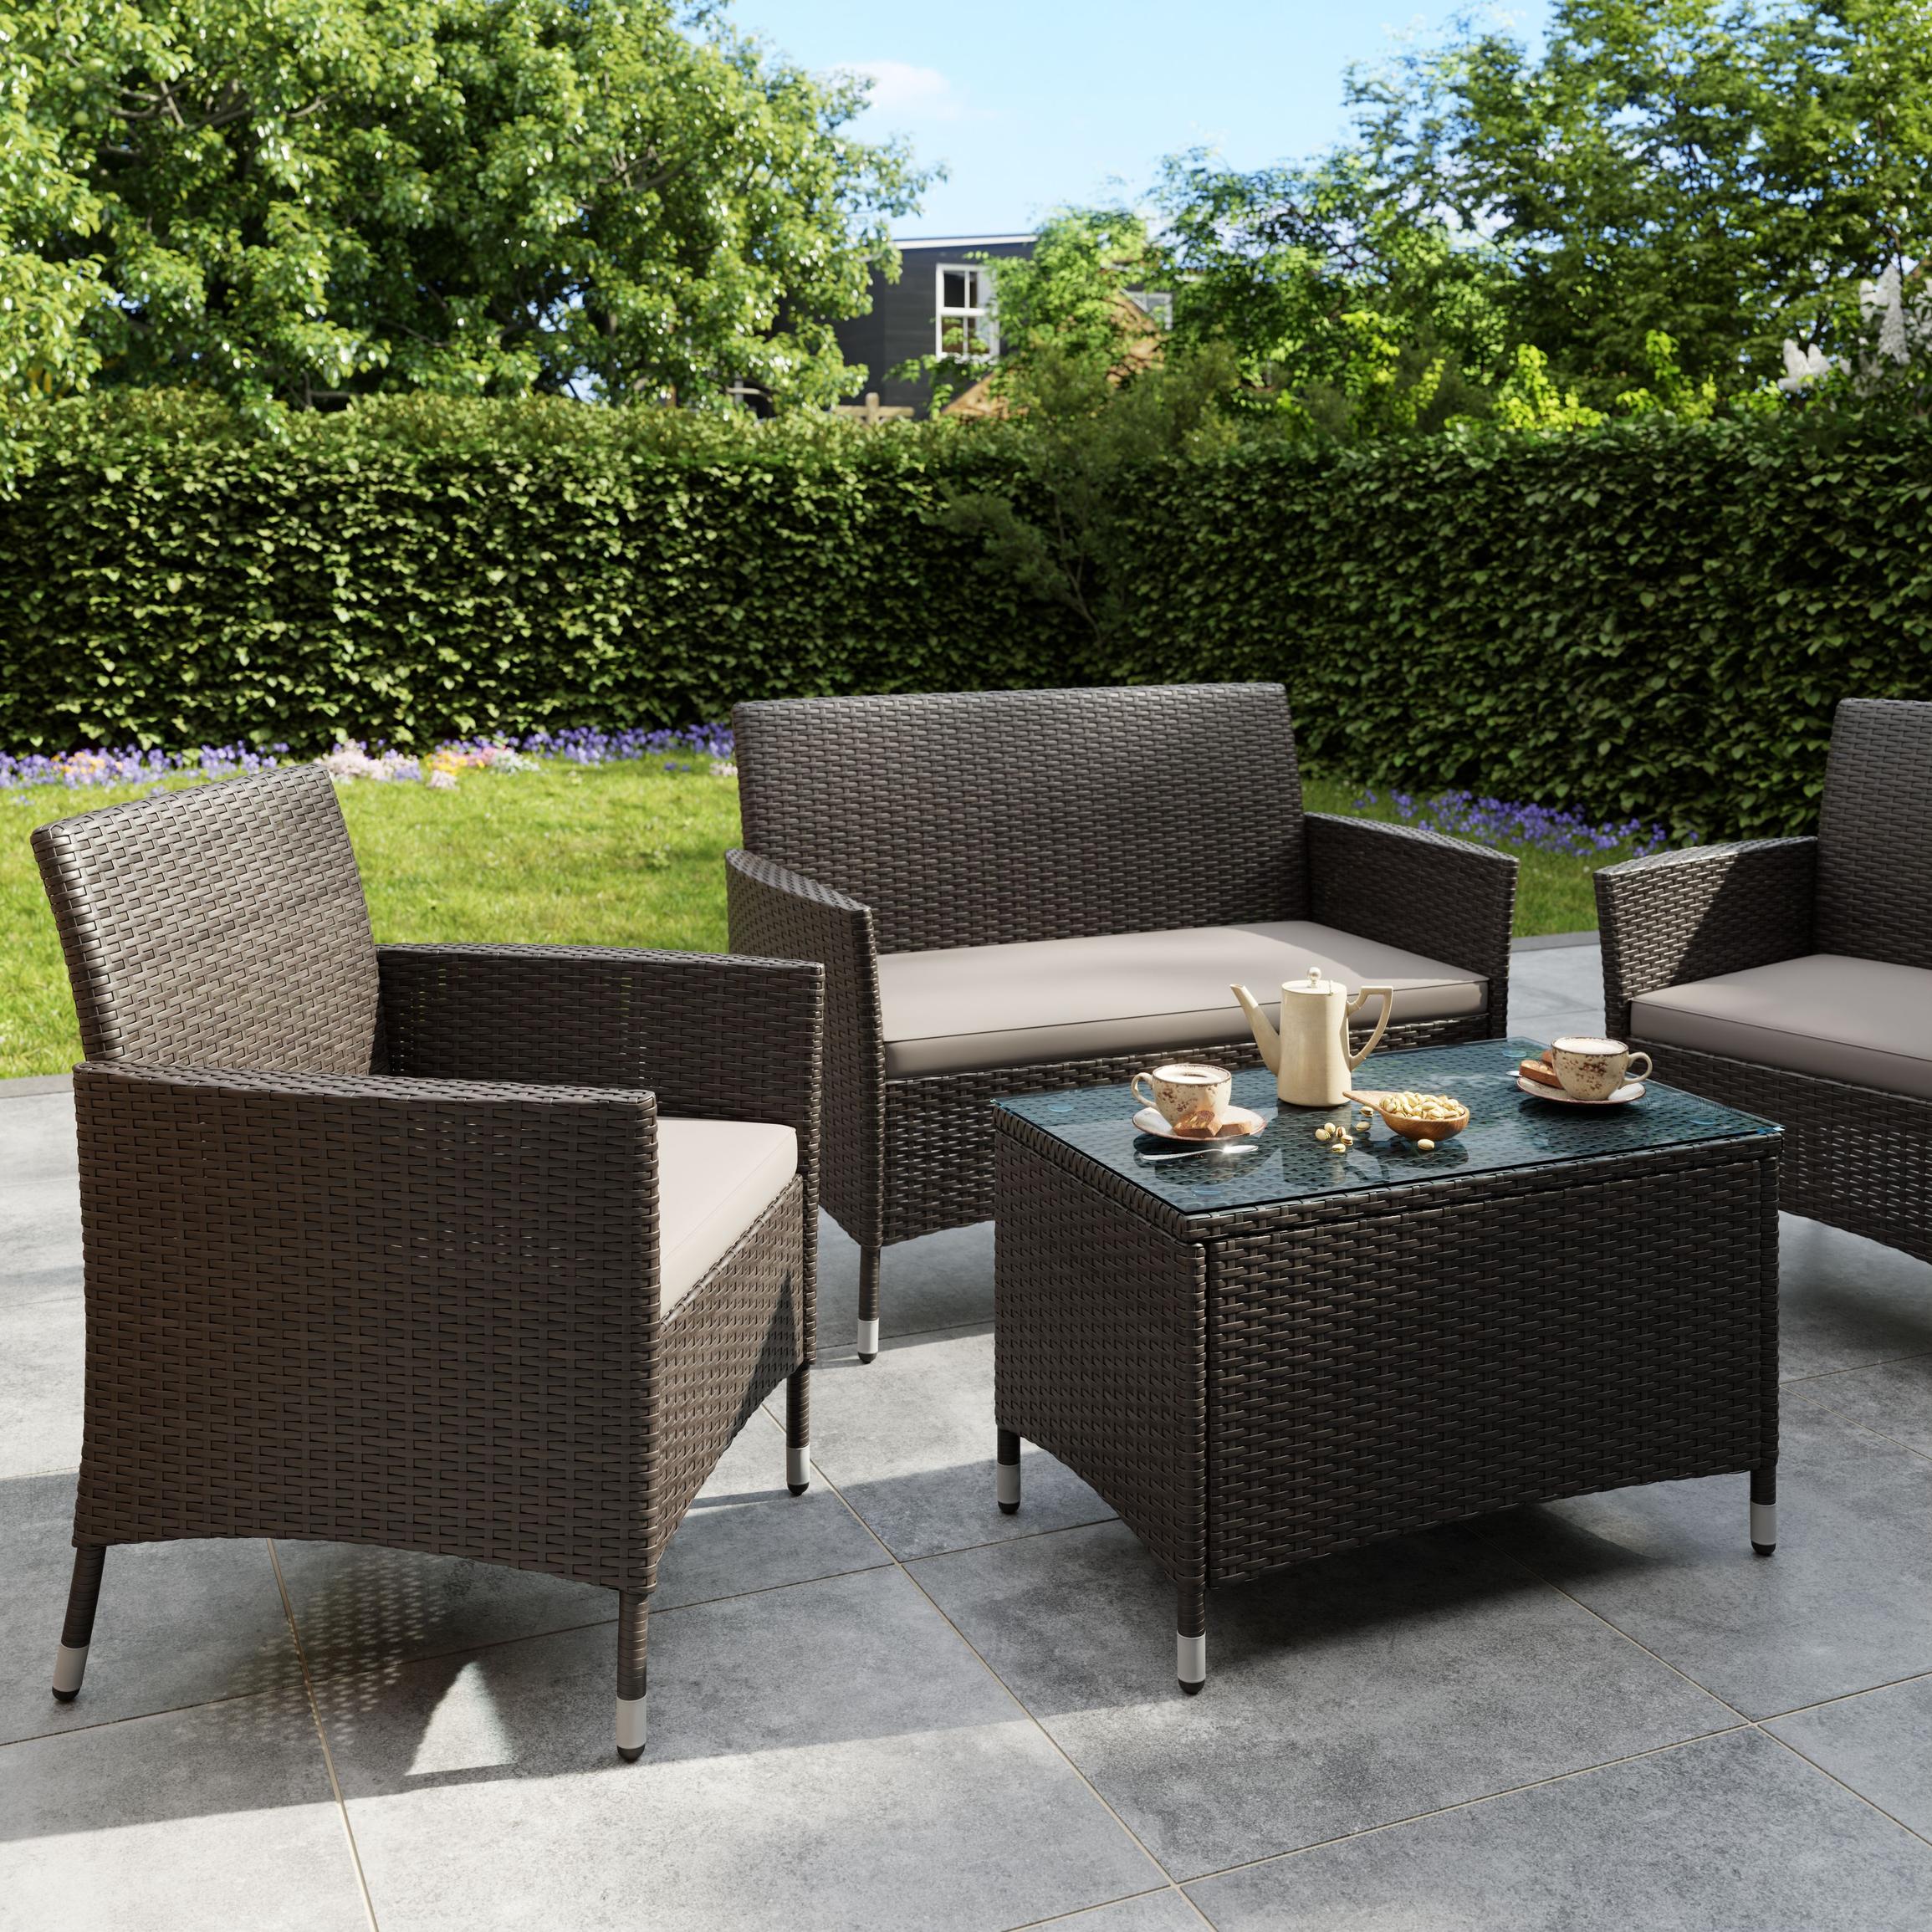 Derry Light black Rattan effect 4 Seater Coffee set offers at £150 in B&Q